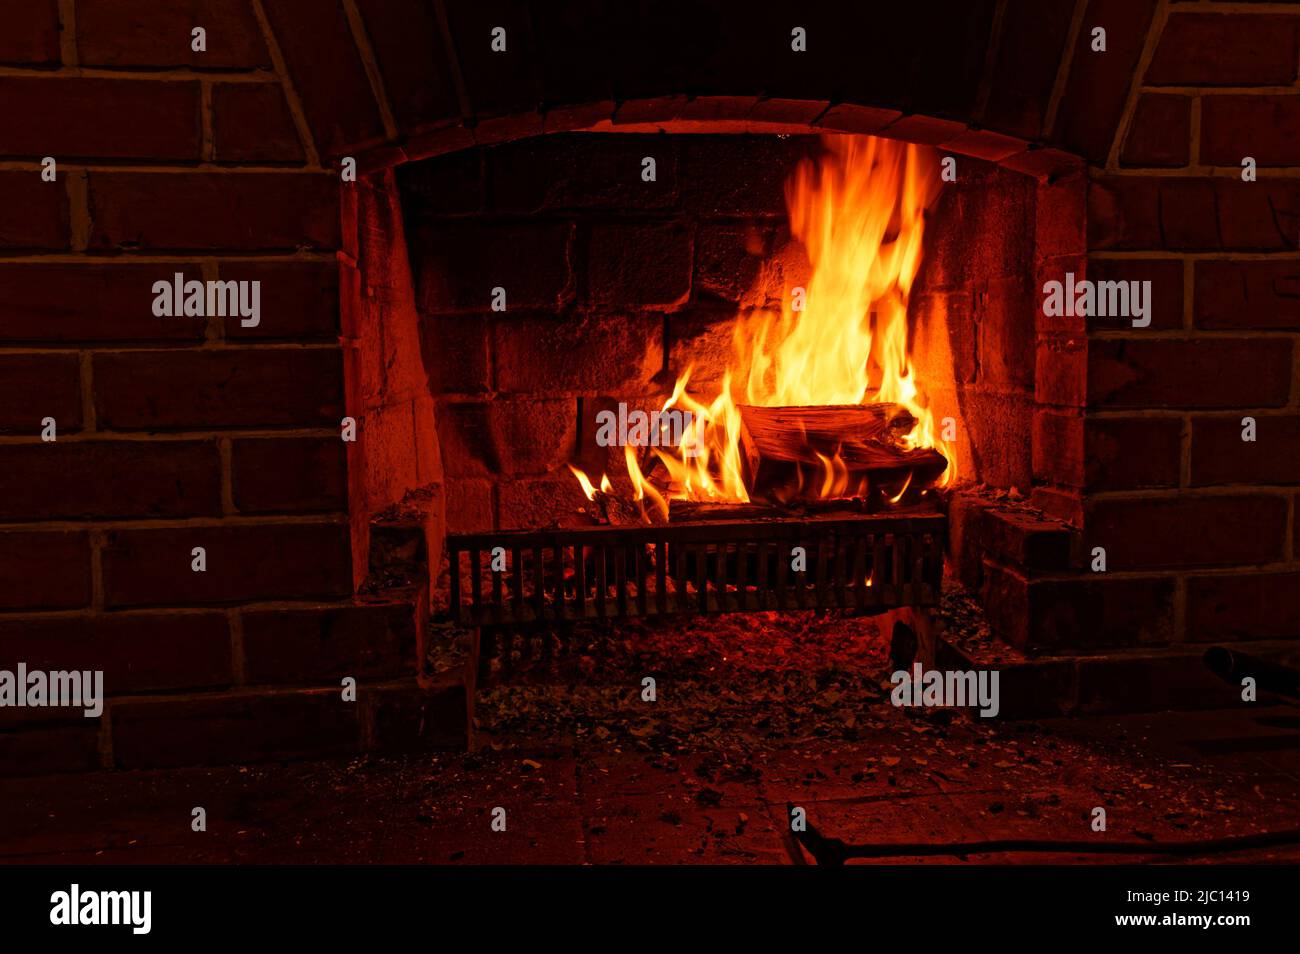 Winter warmth, an open fire burns brightly Stock Photo